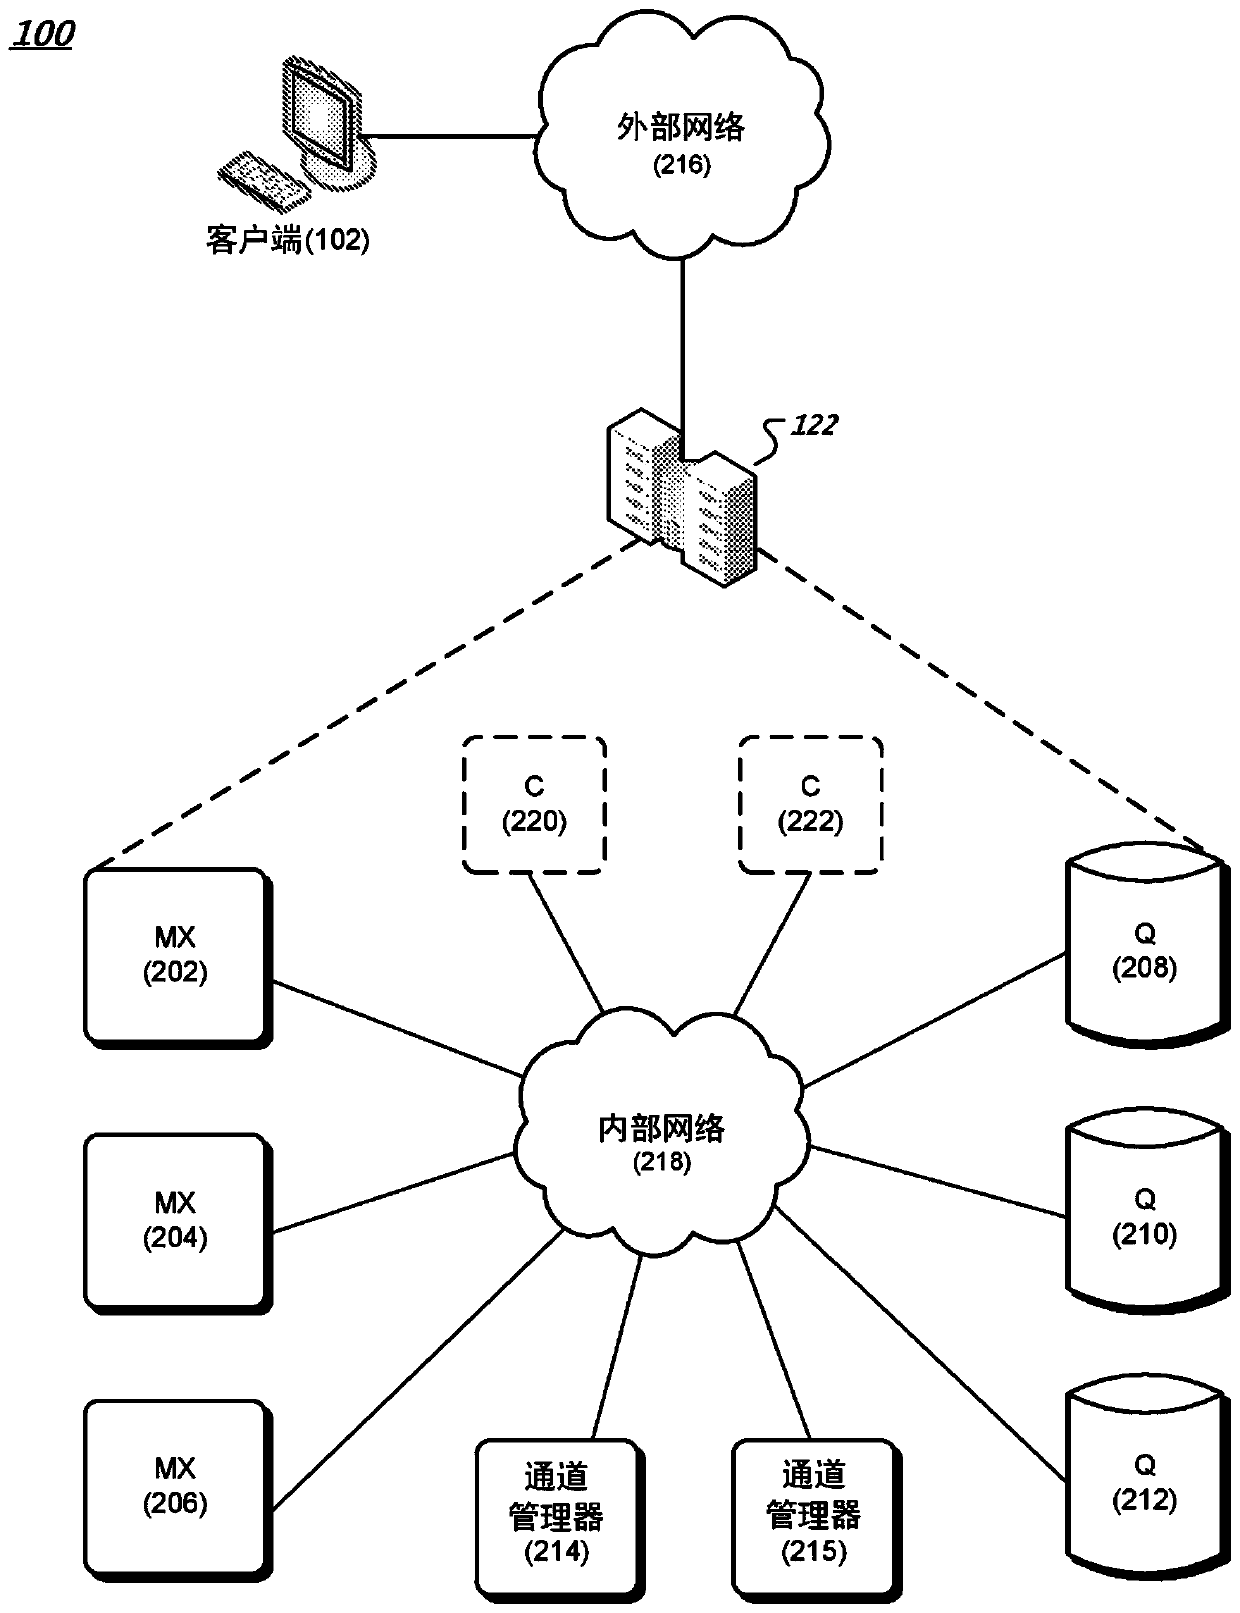 Systems and methods for providing messages to multiple subscribers